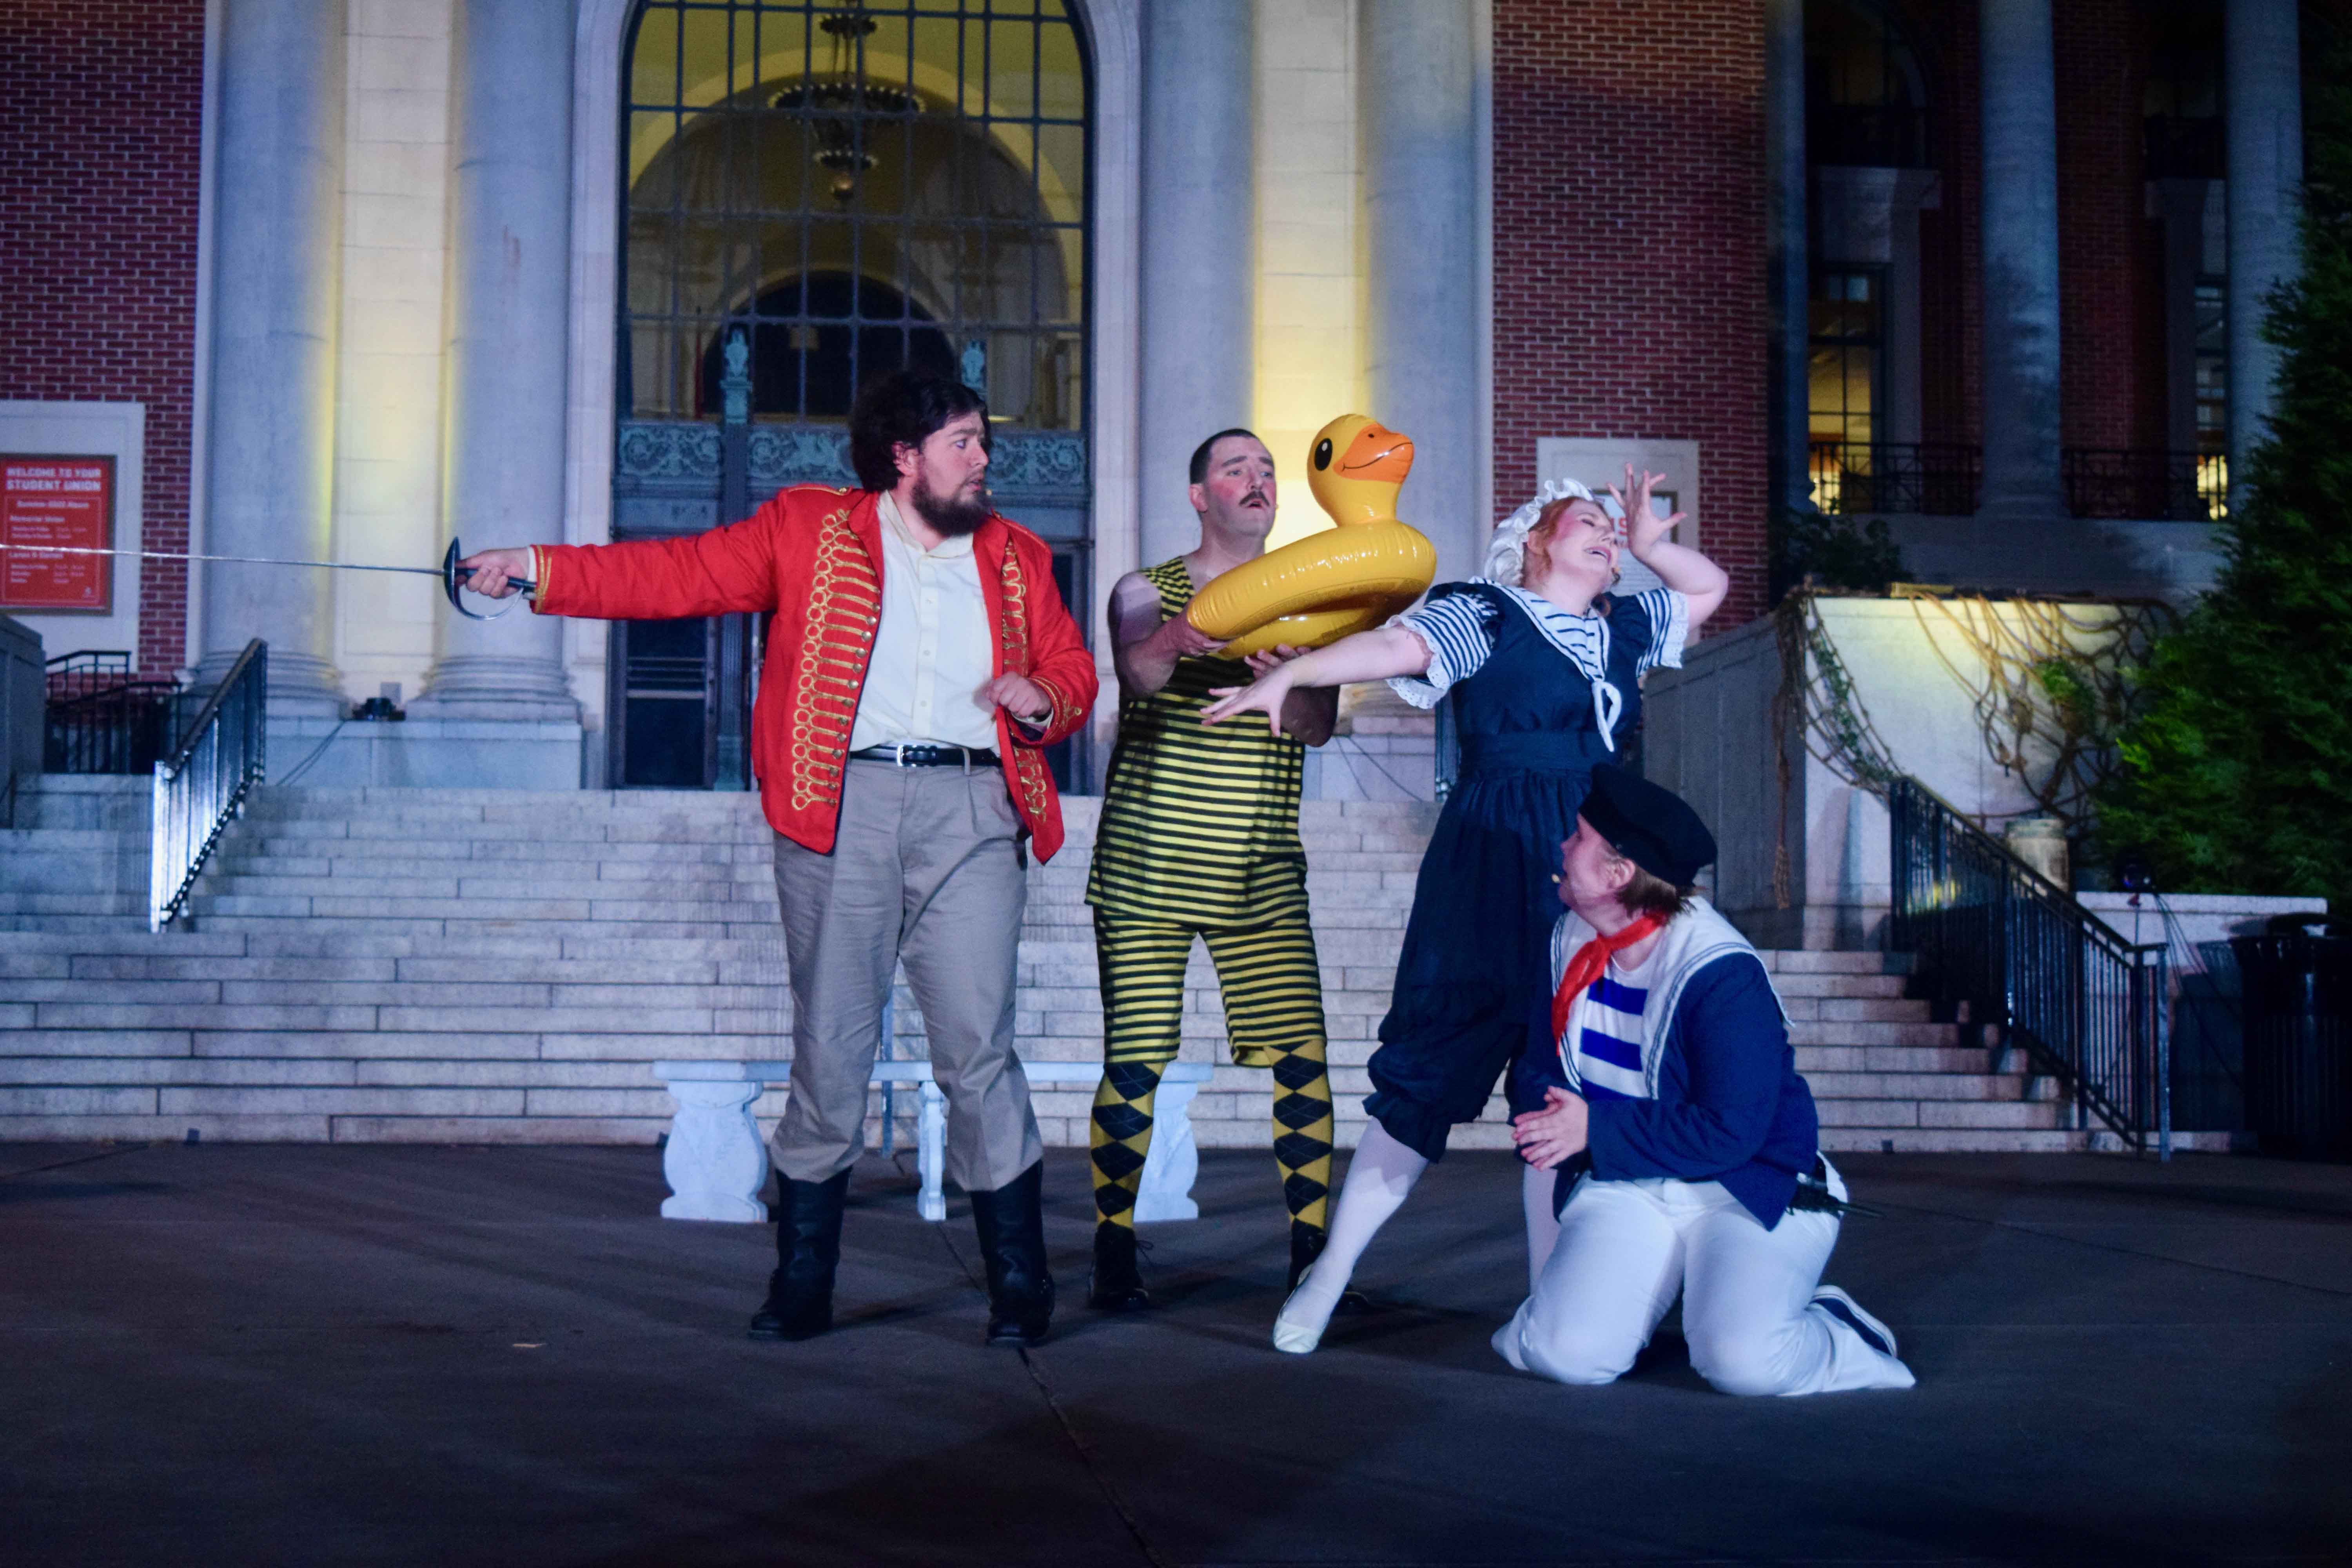 “Twelfth Night” brings the “music of love” to OSU’s Bard in the Quad